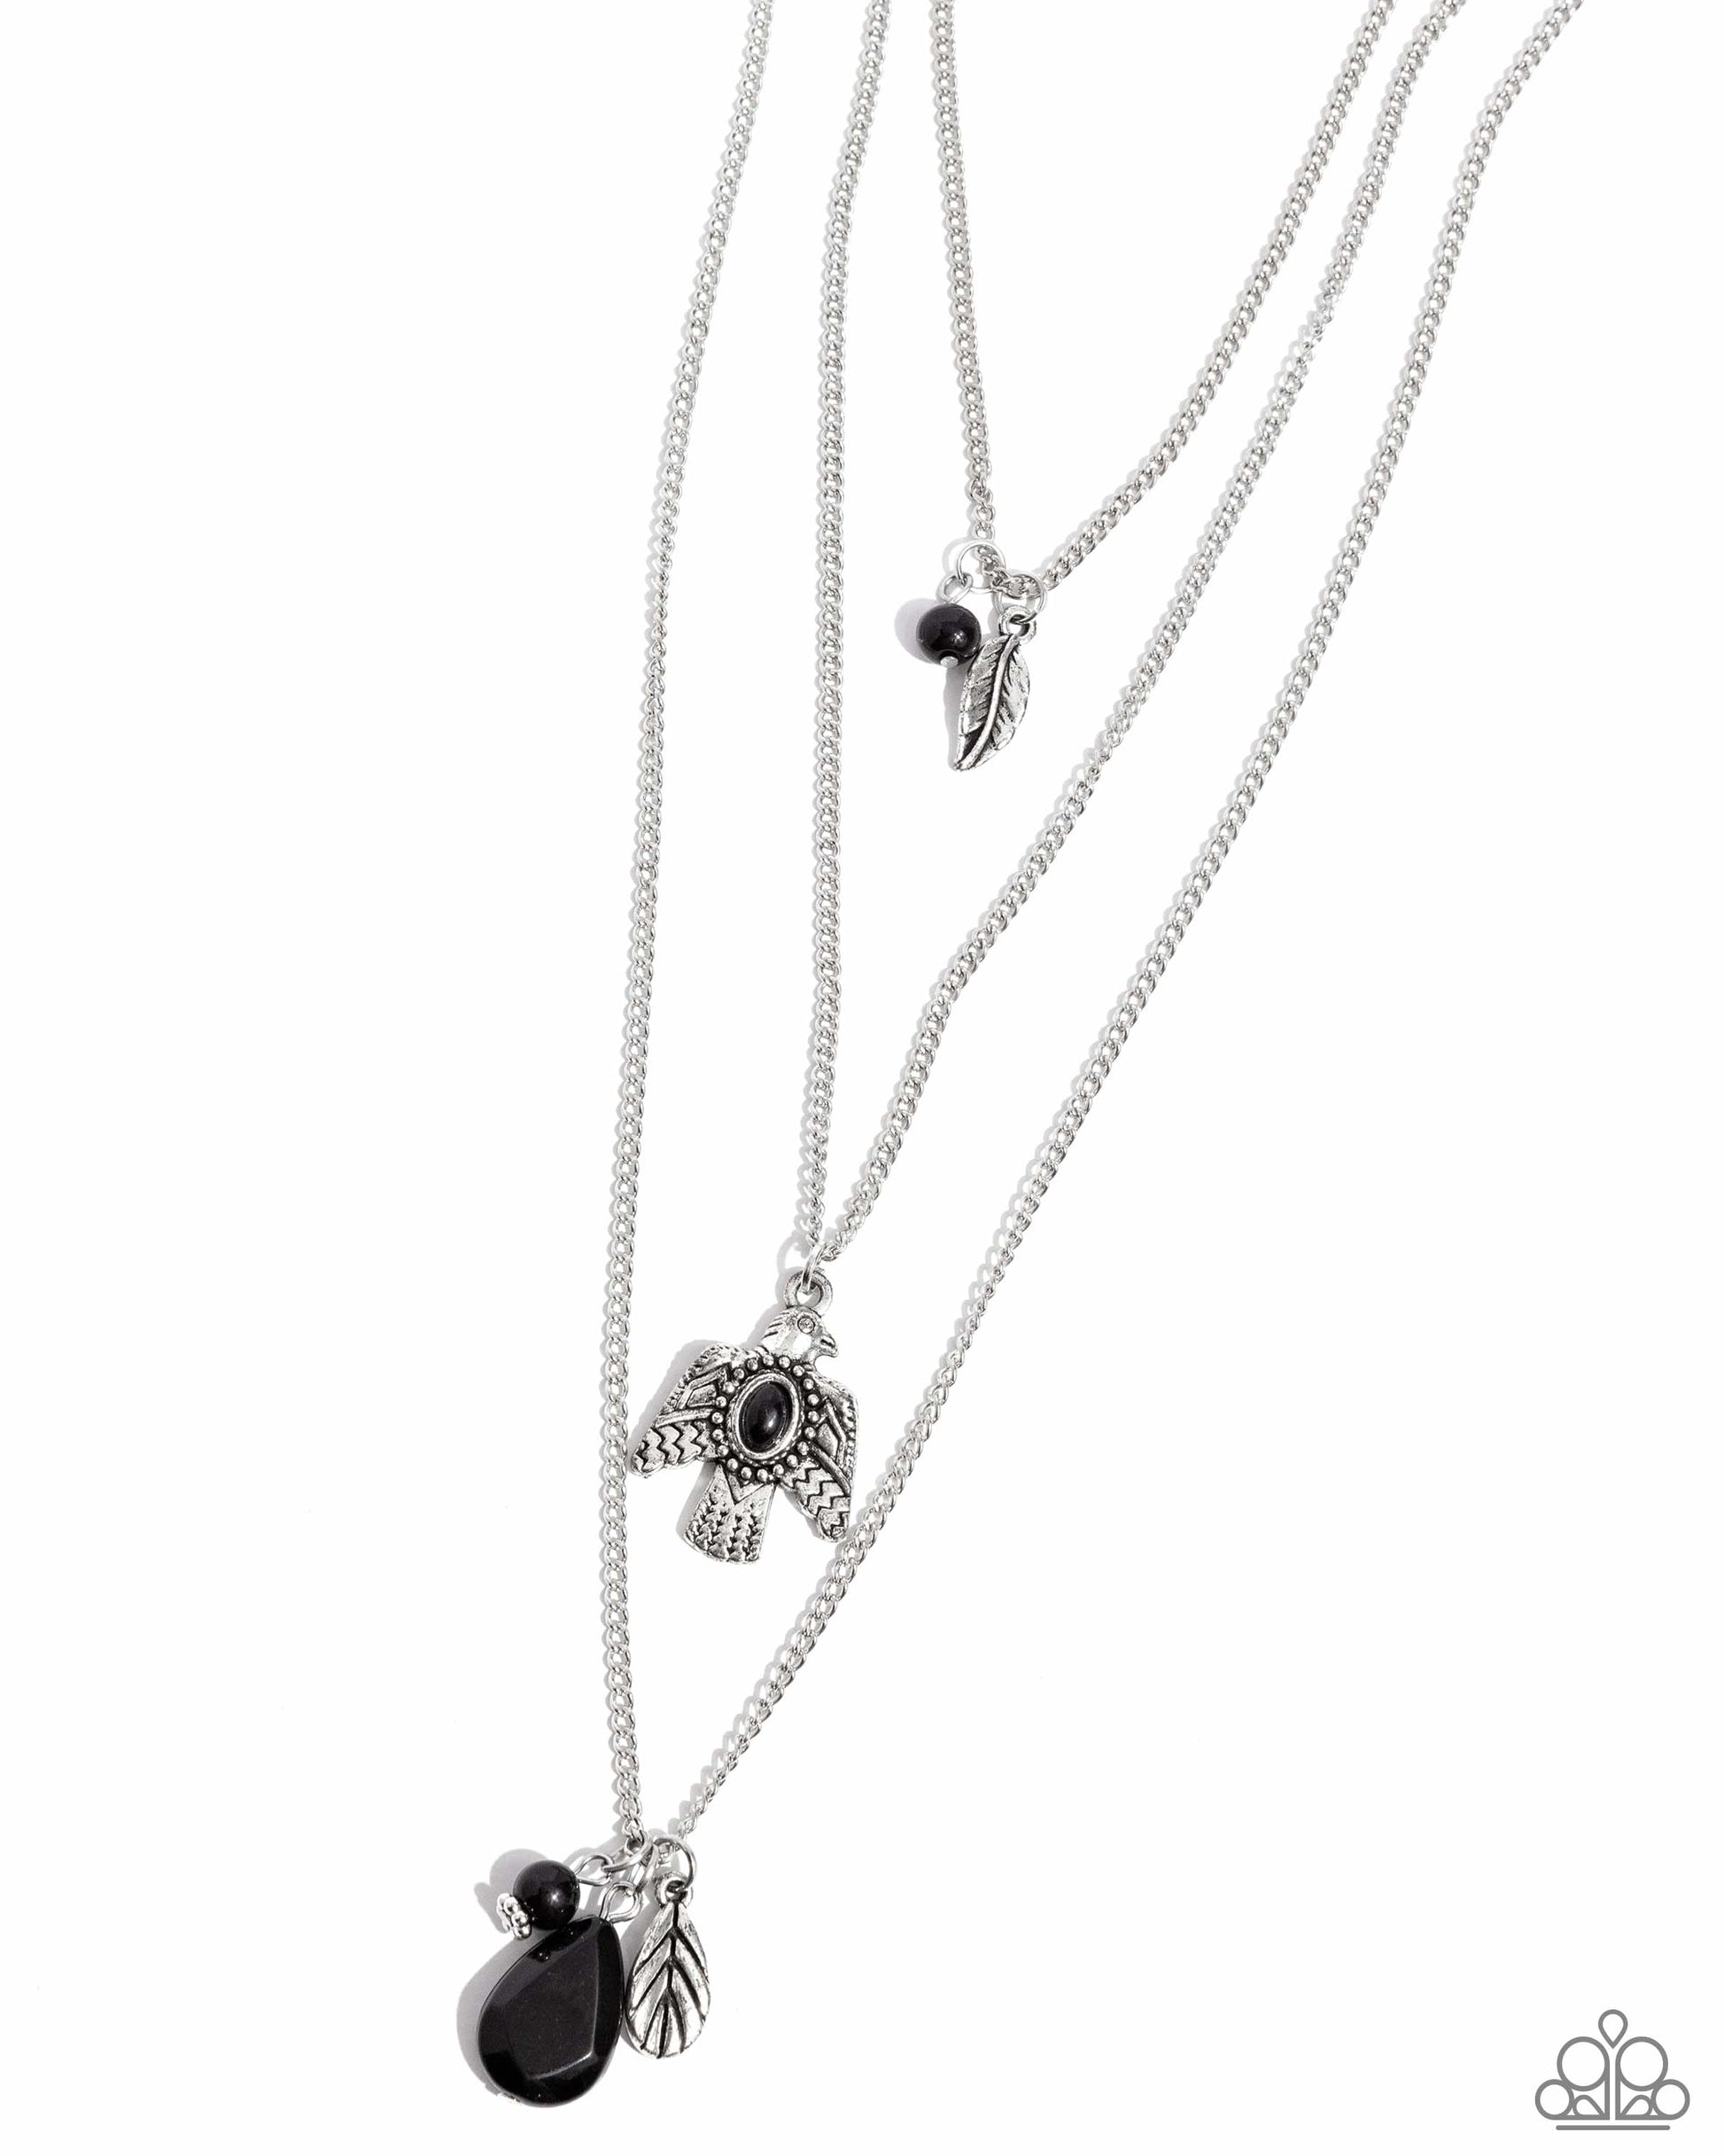 Soar With the Eagles - black - Paparazzi necklace